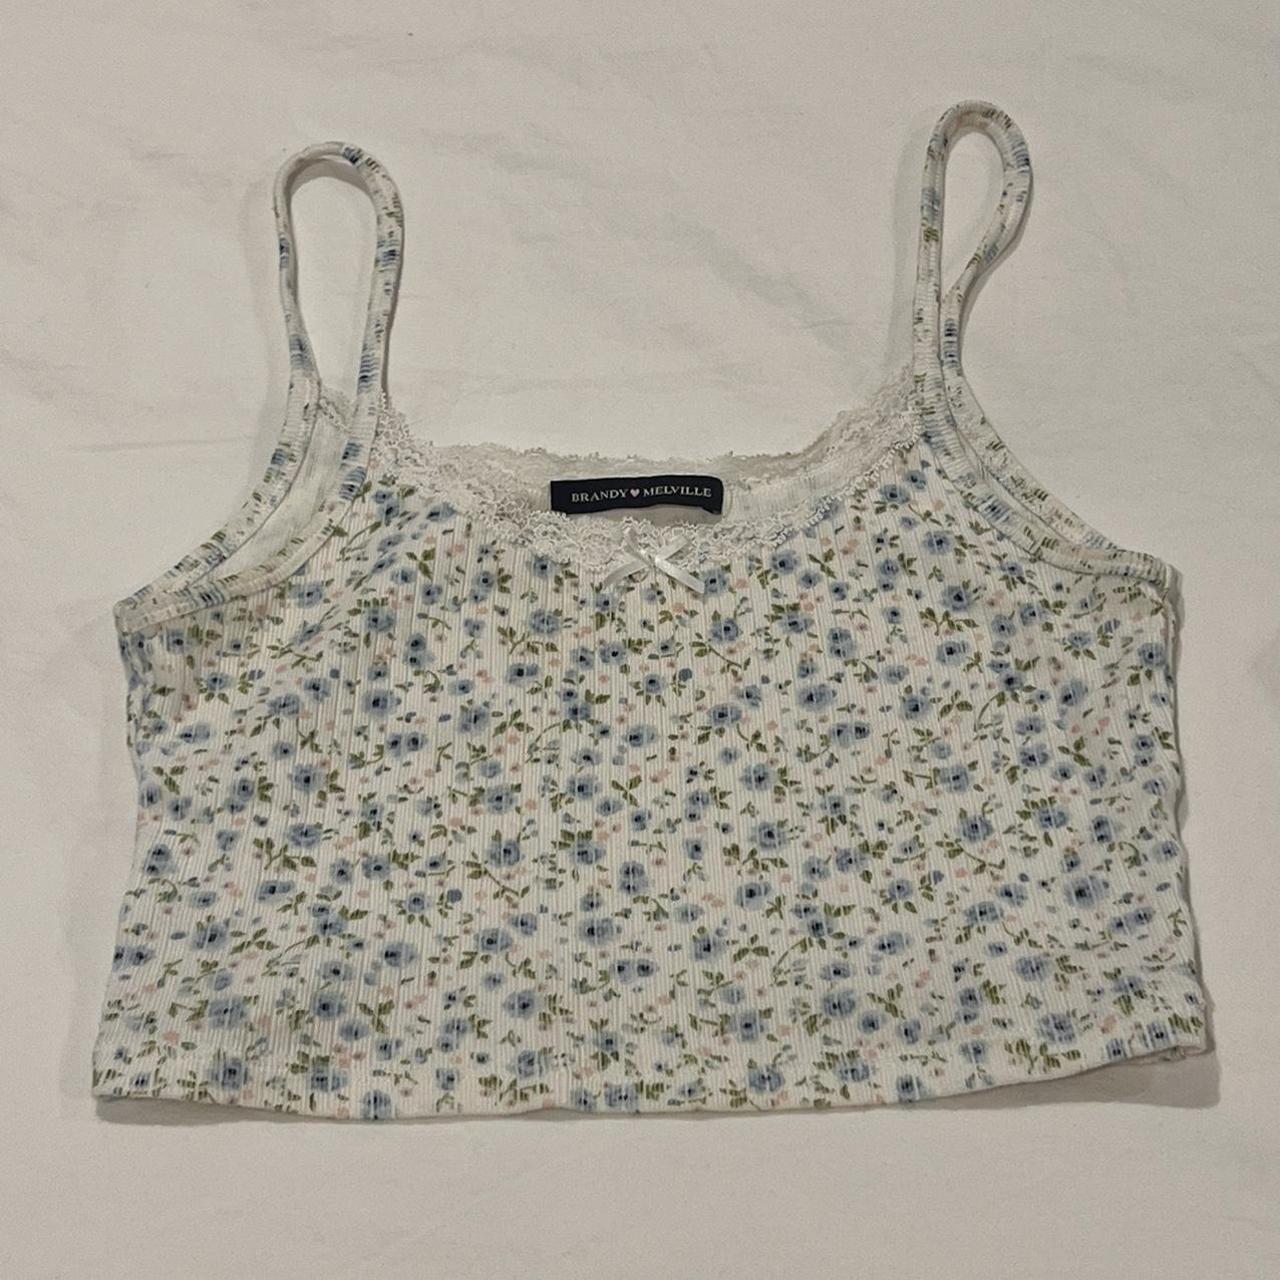 BNWT Brandy Melville Skylar lace and bow floral tank top